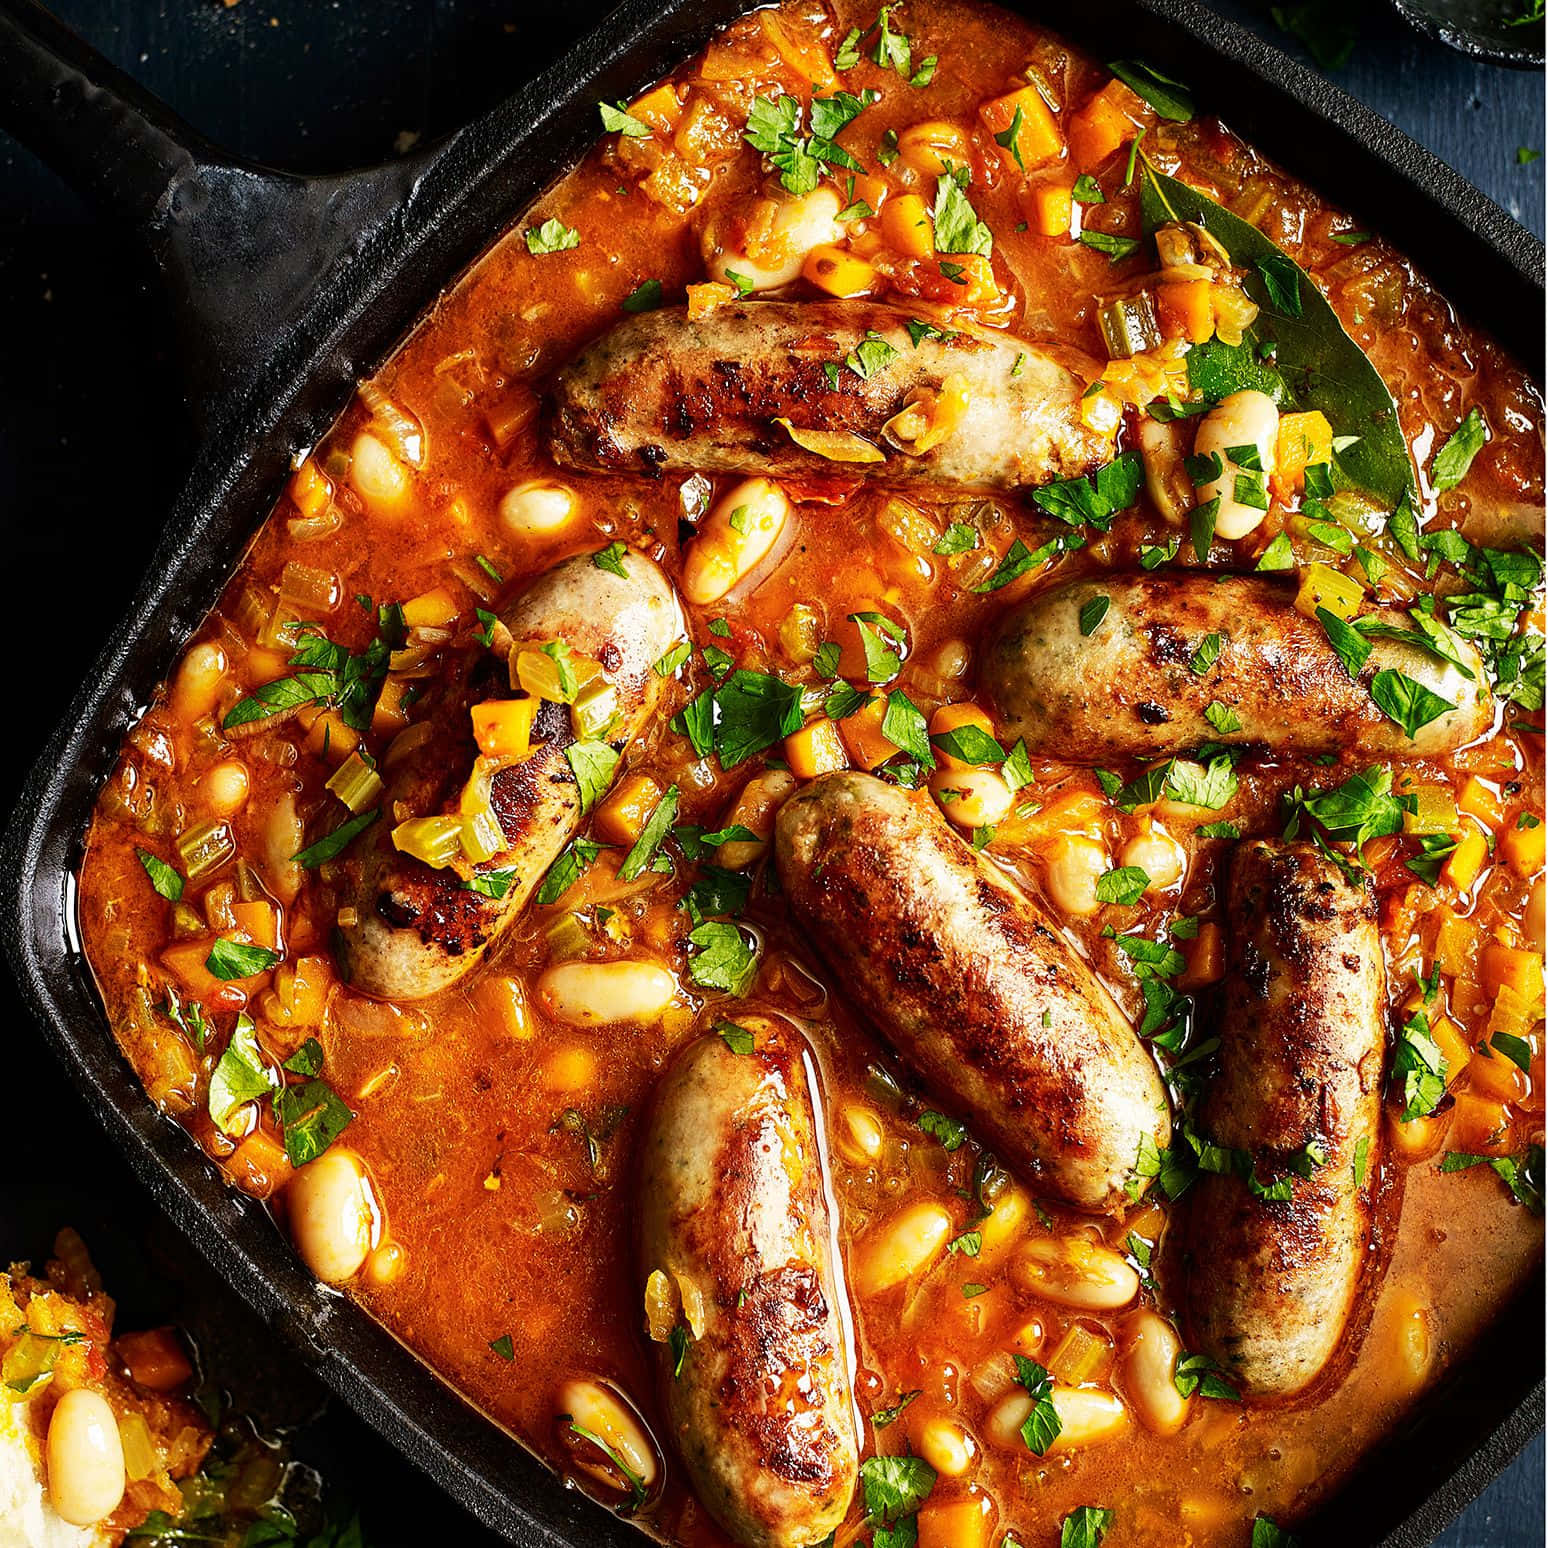 Sausages And Beans In A Skillet